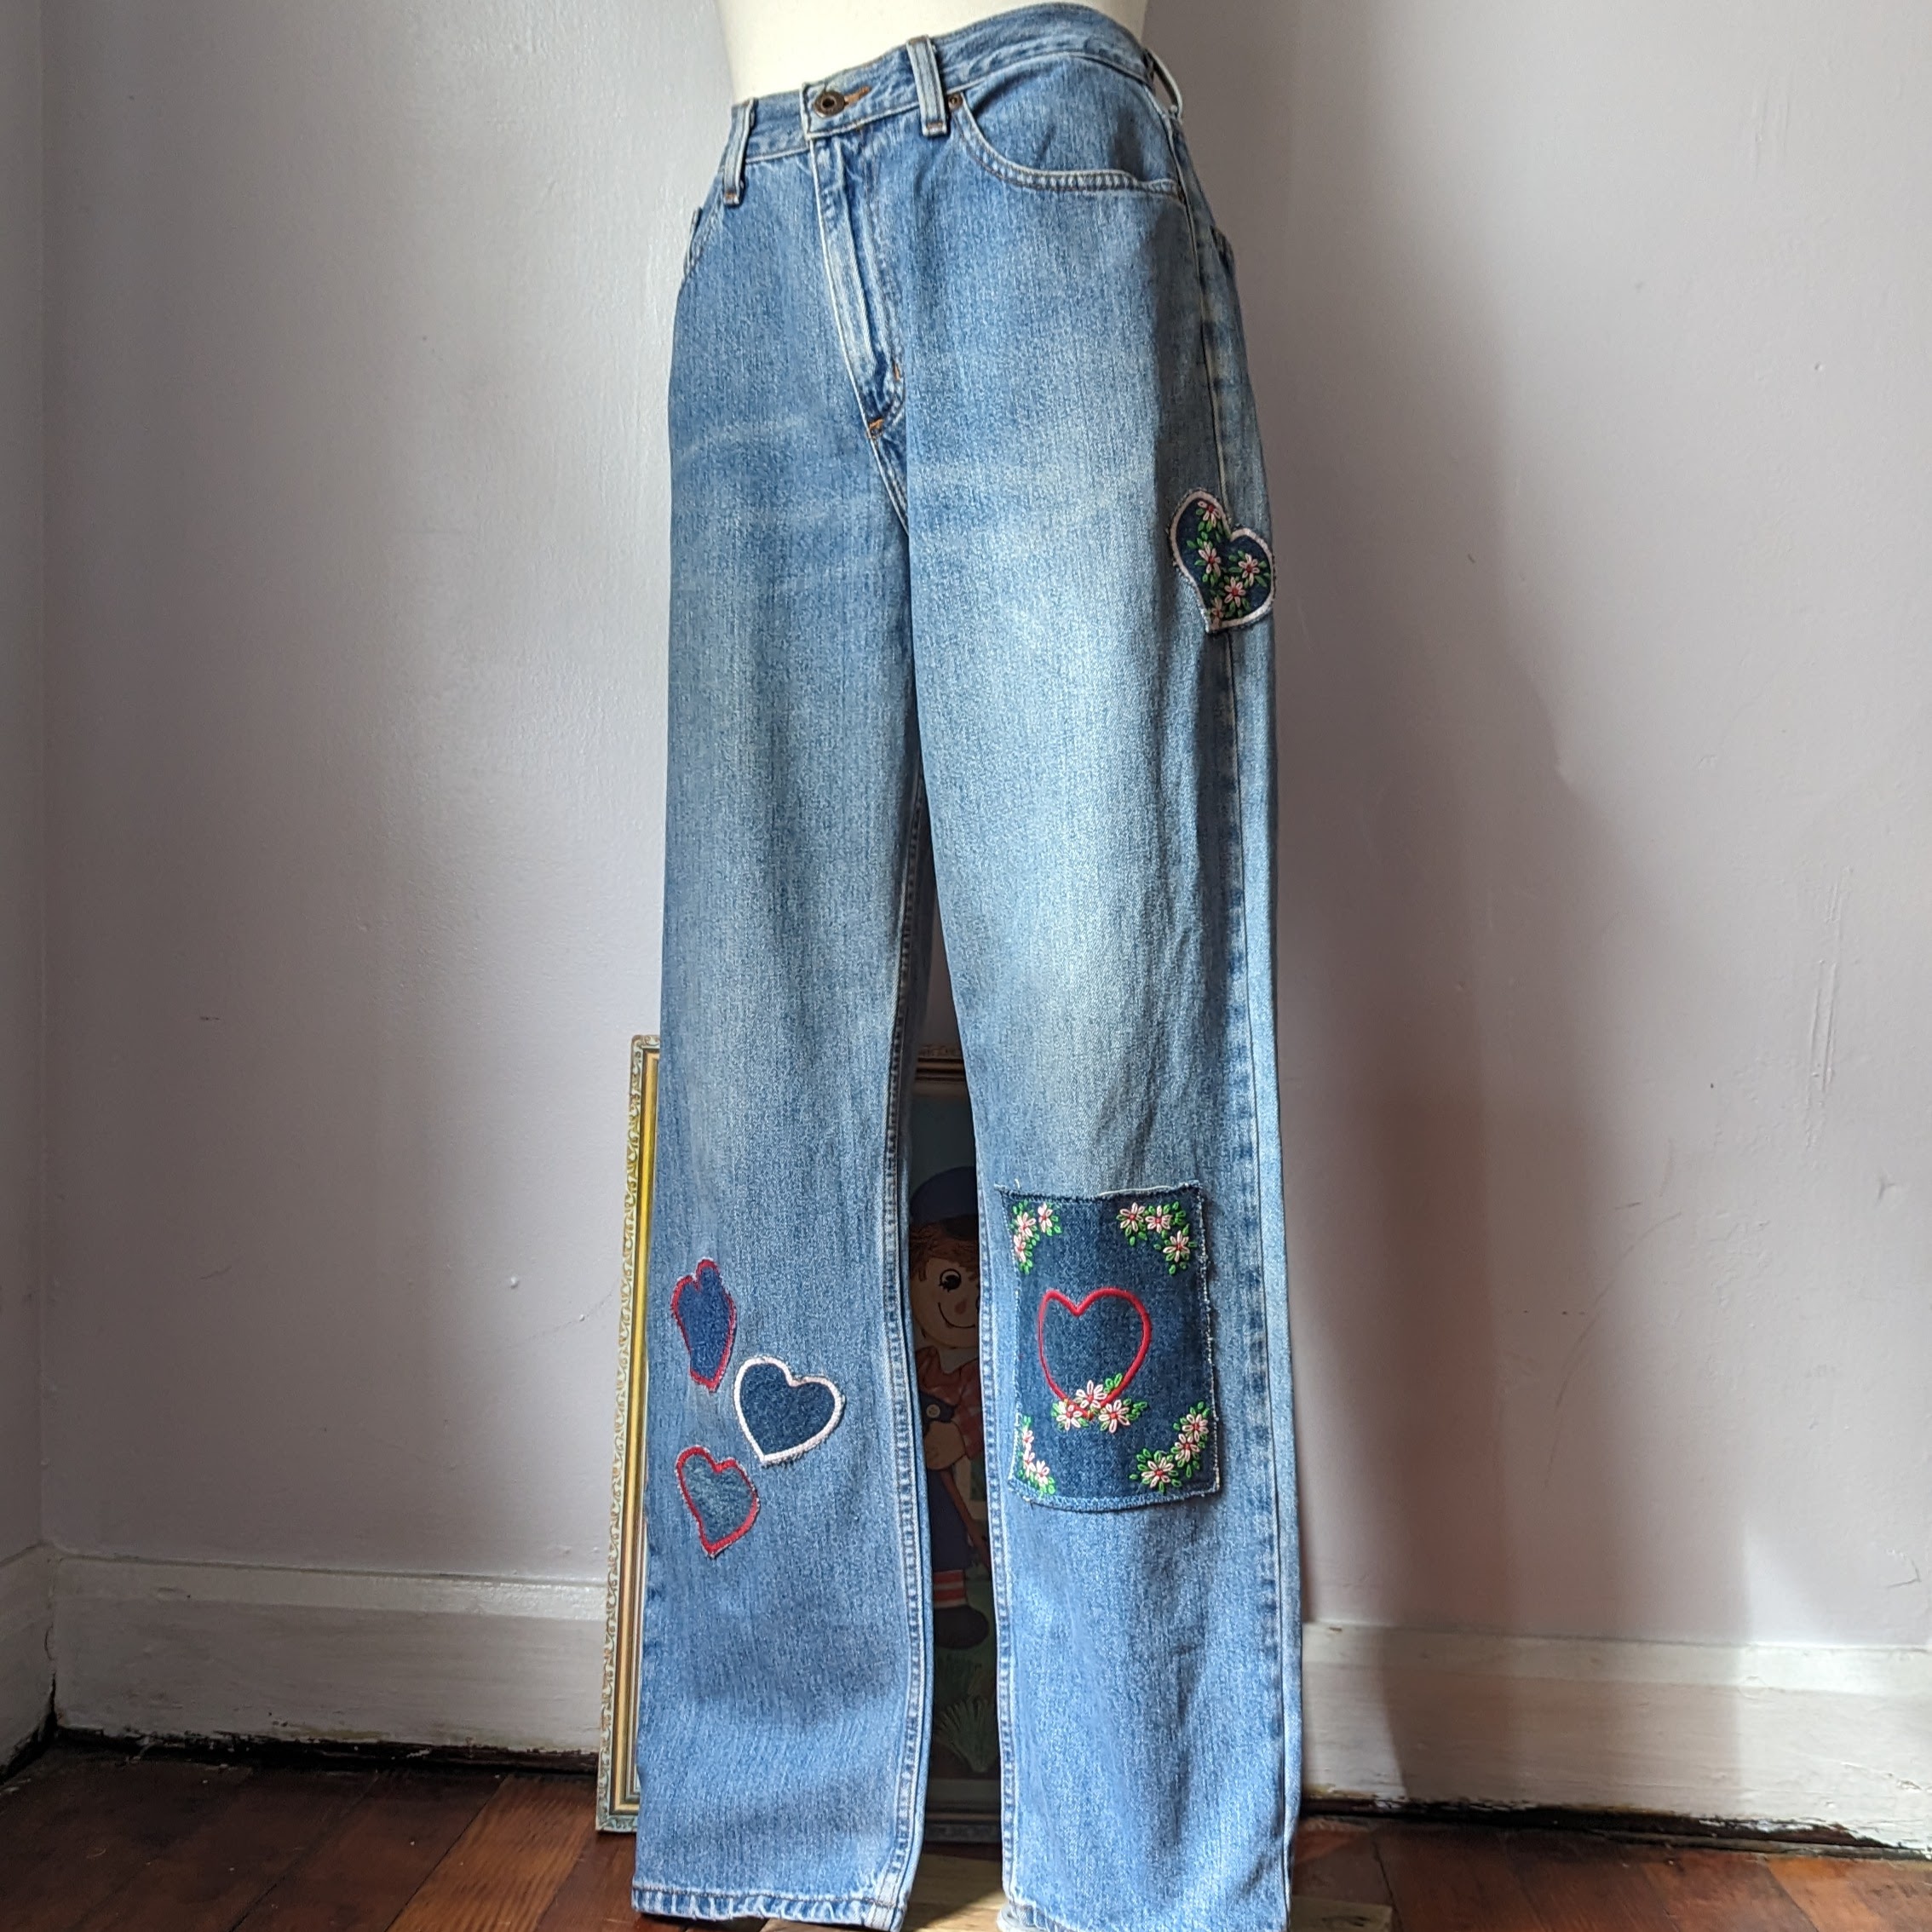 RE.STATEMENT | Upcycled Fashion Marketplace Unique, Upcycled, Sustainable Embroidered Patchwork Heart Jeans by Sensible Slacks - One-Of-A-Kind, Exclusive Clothing